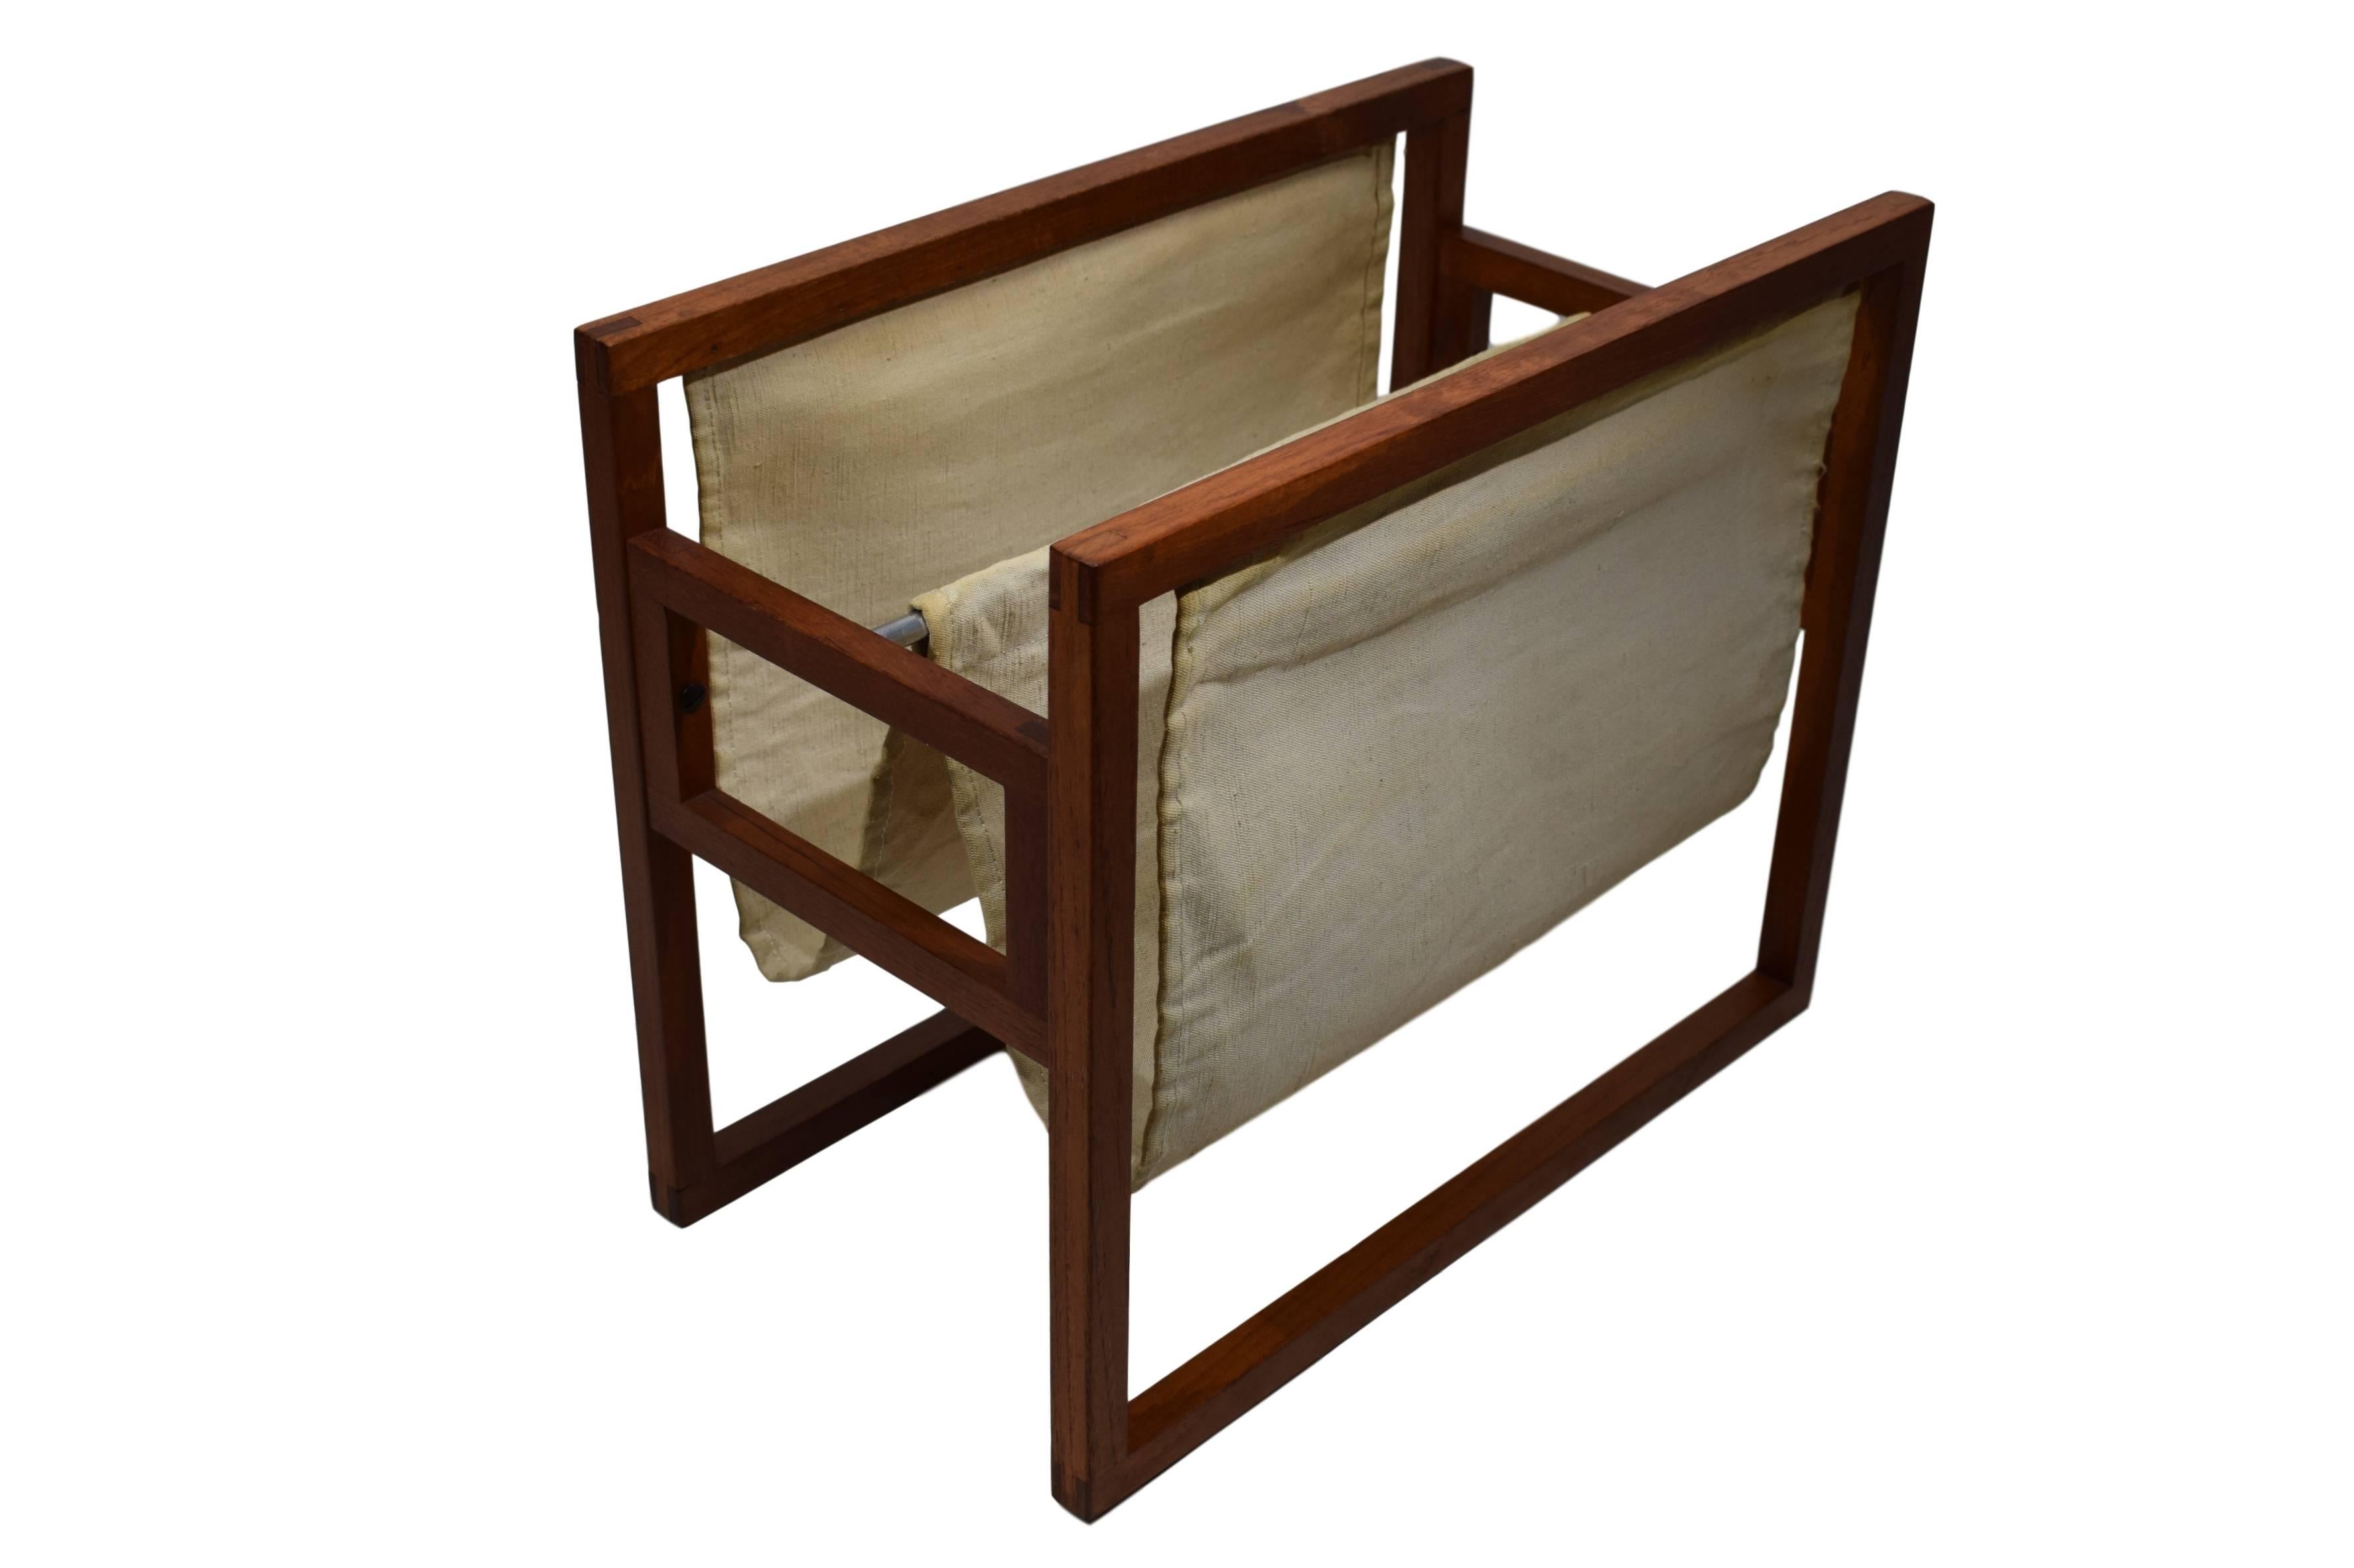 A Danish midcentury magazine rack by Kai Kristiansen. The magazine rack has a teak frame with finger joints and dual canvas slings.